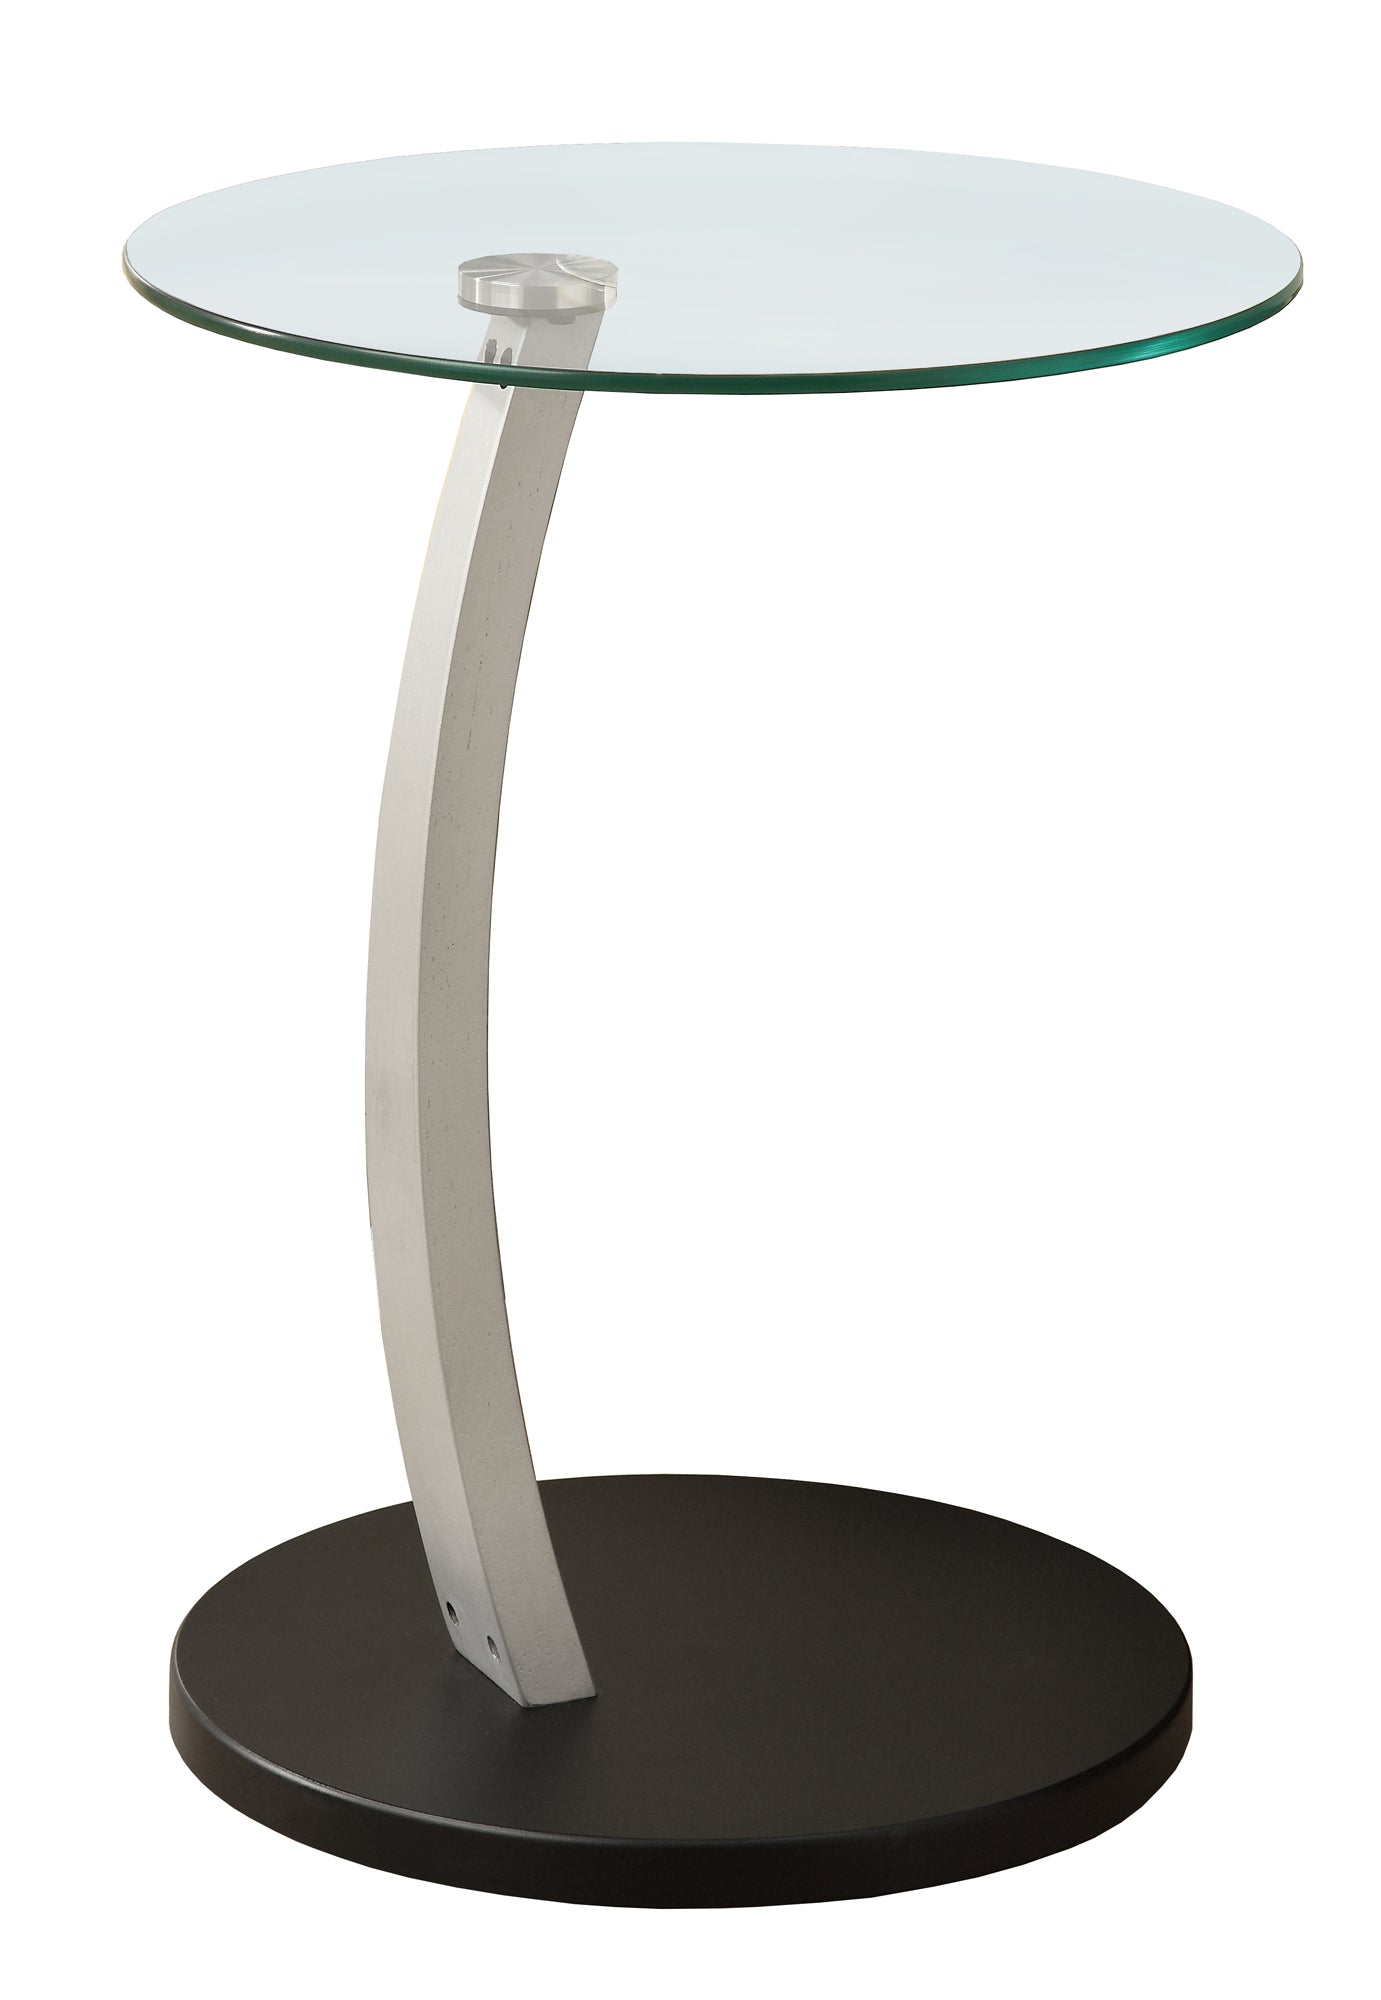 MN-773009    Accent Table, C-Shaped, End, Side, Snack, Living Room, Bedroom, Laminate, Tempered Glass, Black, Clear, Contemporary, Modern